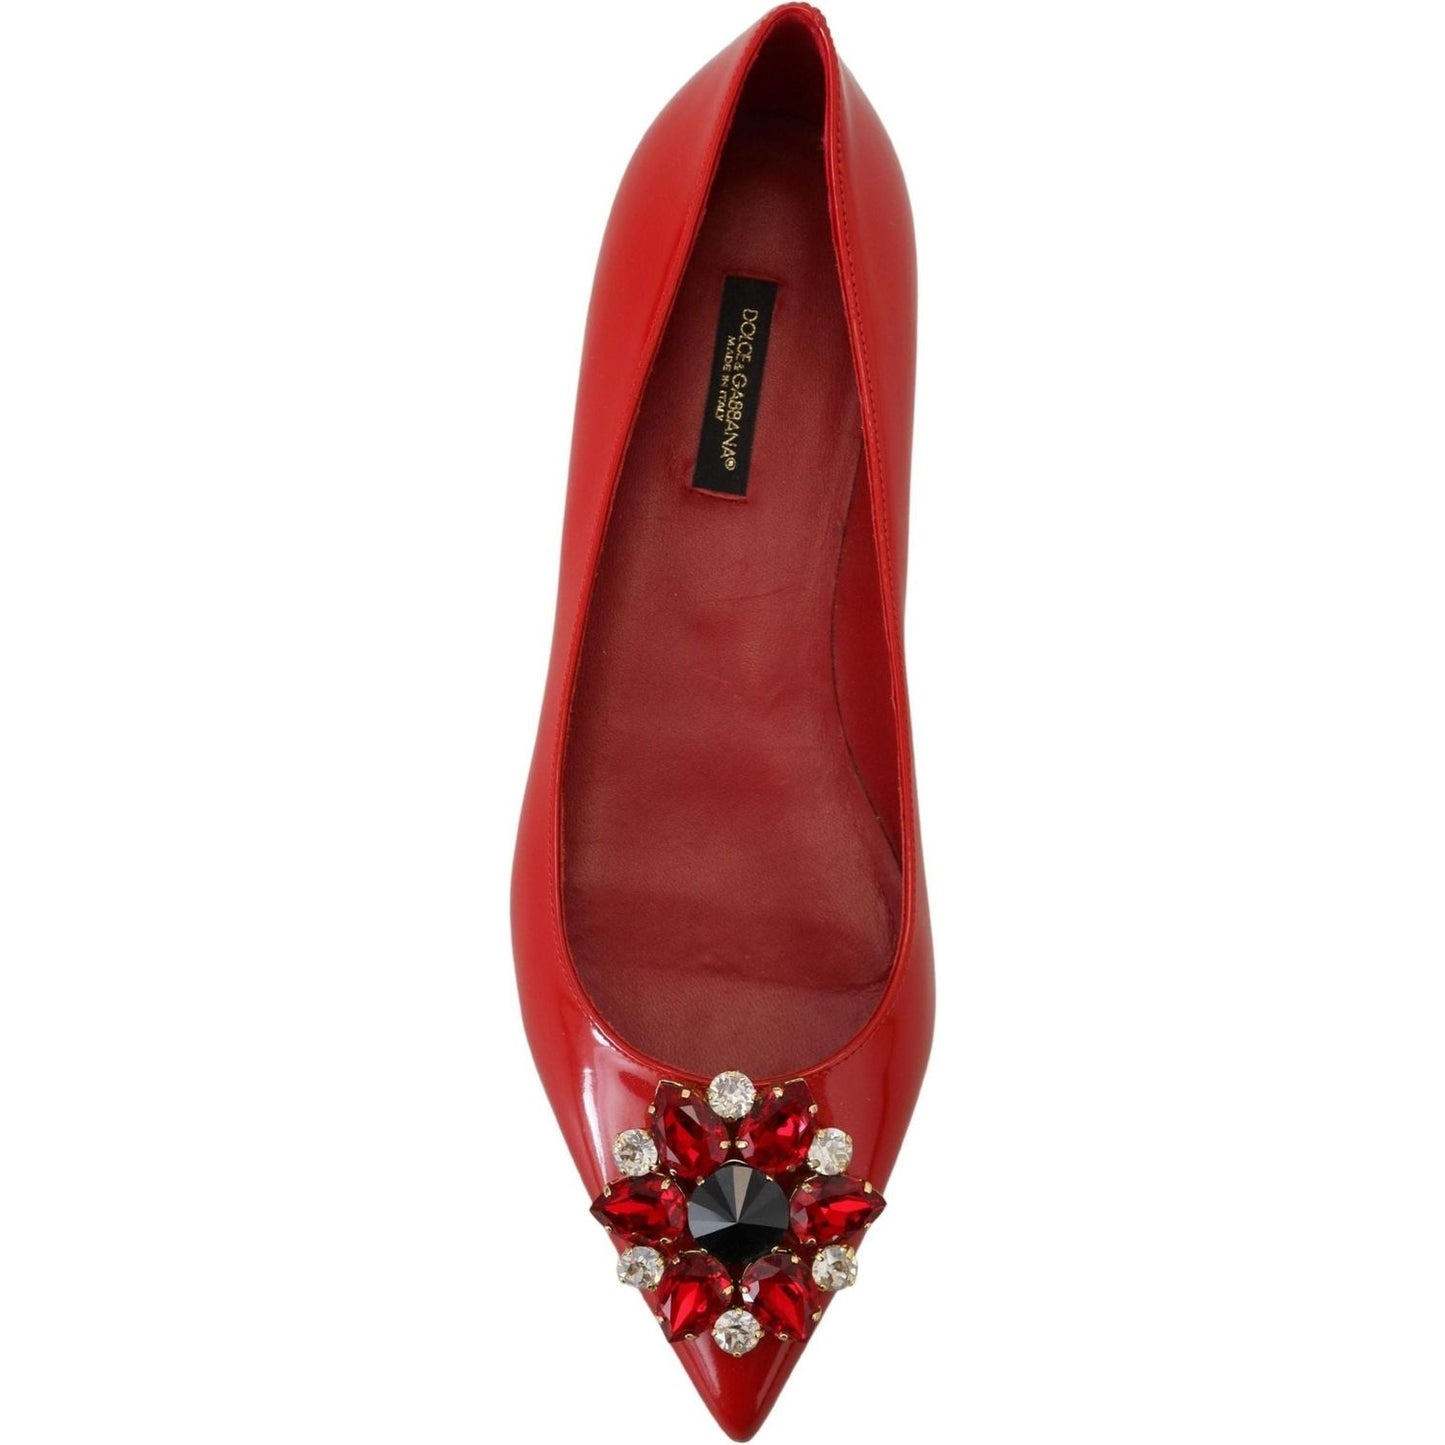 Dolce & Gabbana Red Suede Crystal Loafers - Exquisite Elegance red-leather-crystals-loafers-flats-shoes IMG_8716-scaled-04855f81-08d.jpg